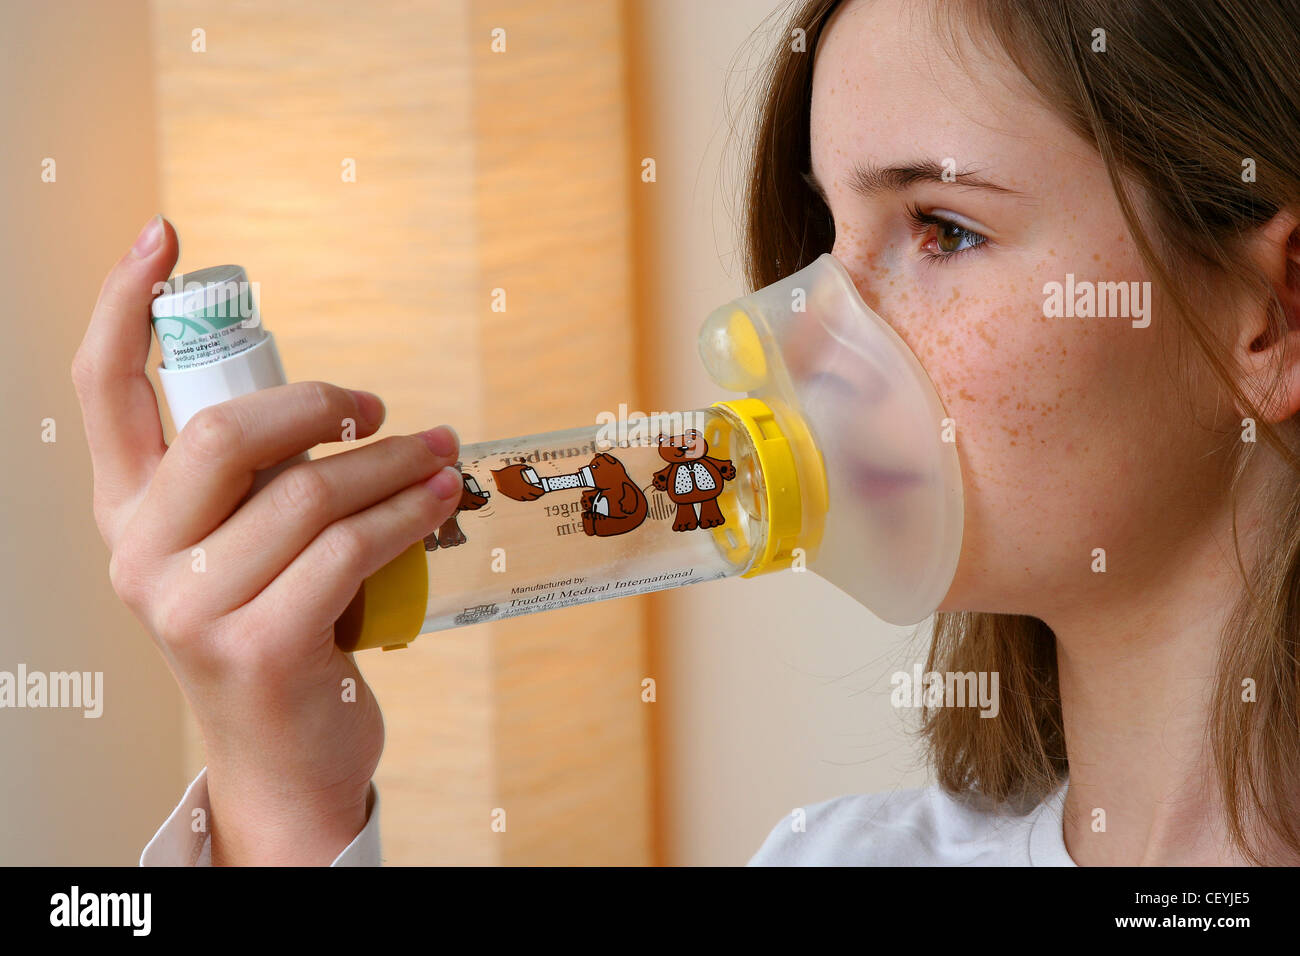 A young female holding an inhaler attachedt to a plastic spacer devise to her face, to treat asthma Stock Photo